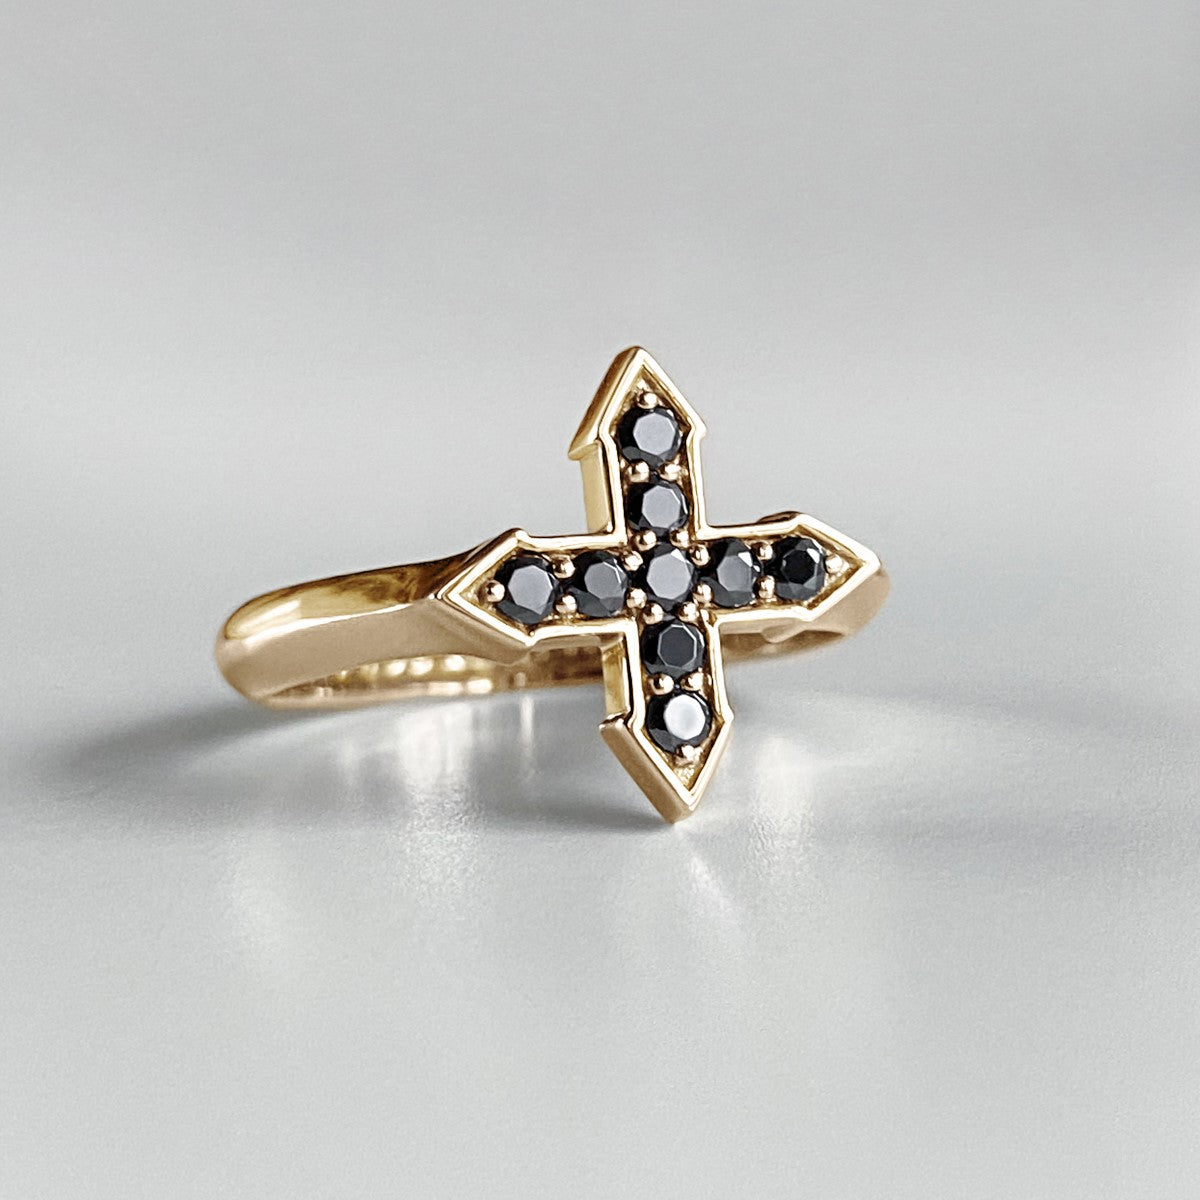 RING "STAR GLOW" WITH BLACK DIAMONDS / SOLID GOLD